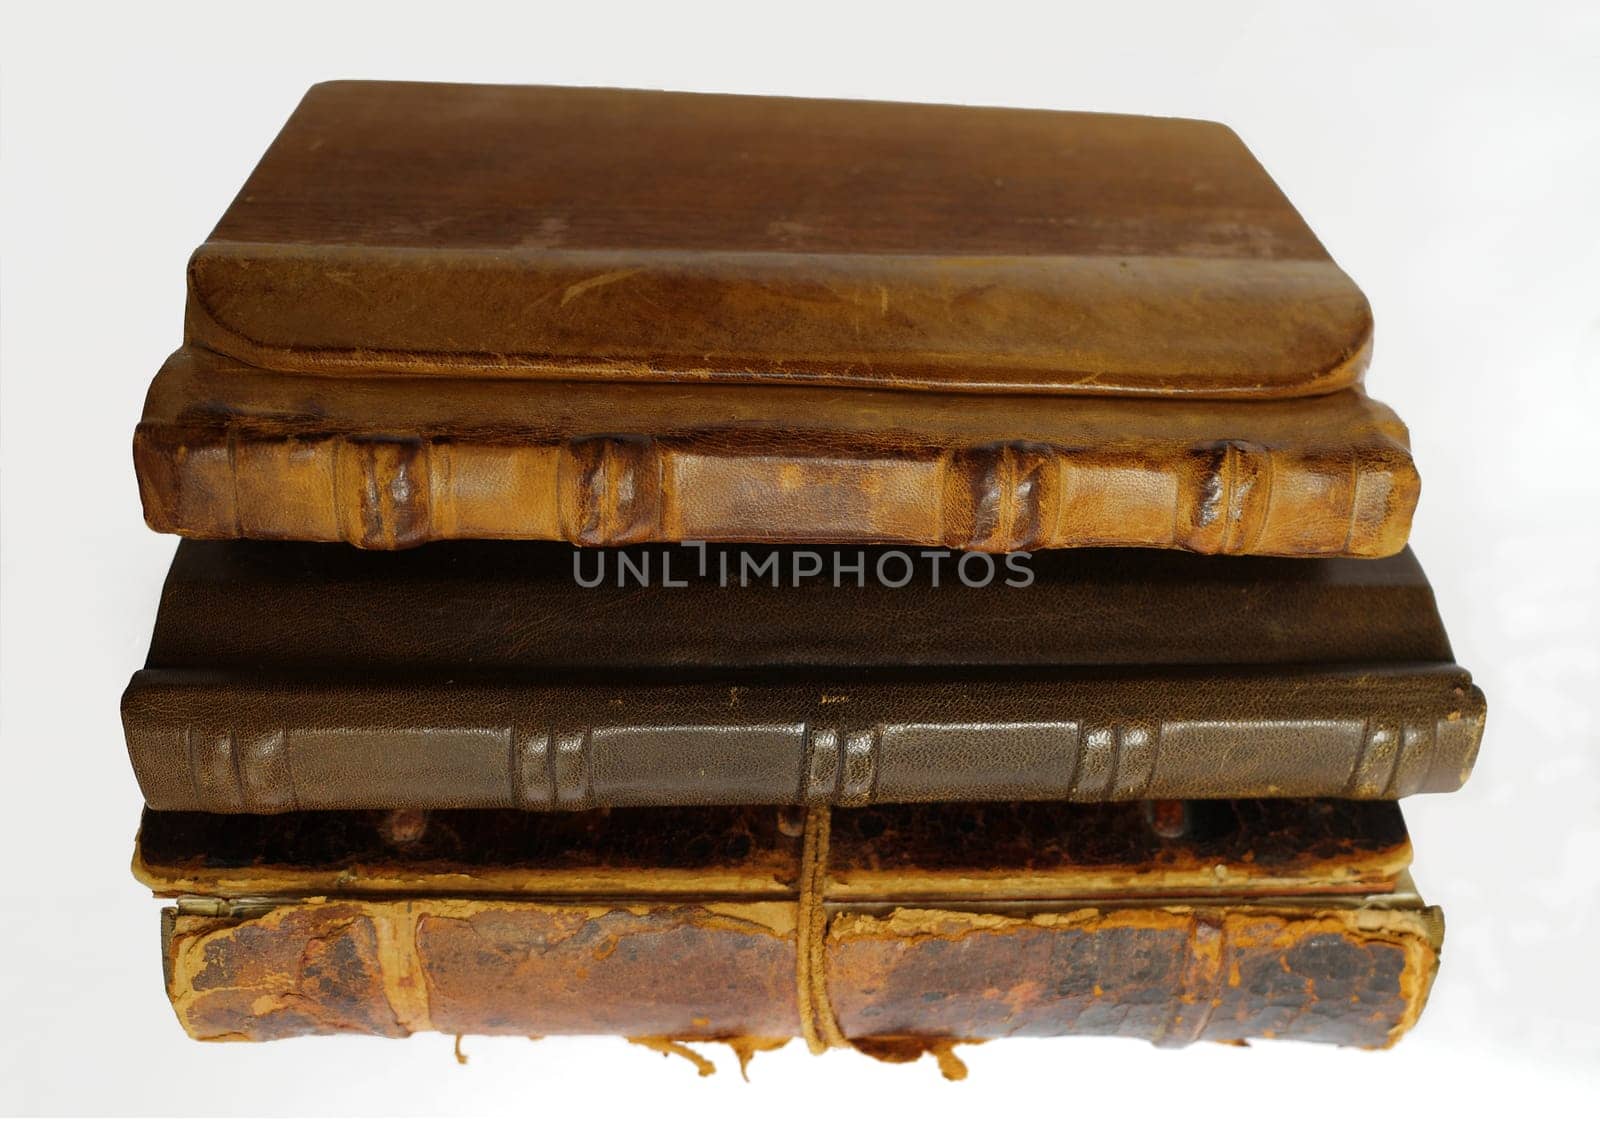 Collection of three old books on a white background. The cover of these books is made of leather or leather and wood.